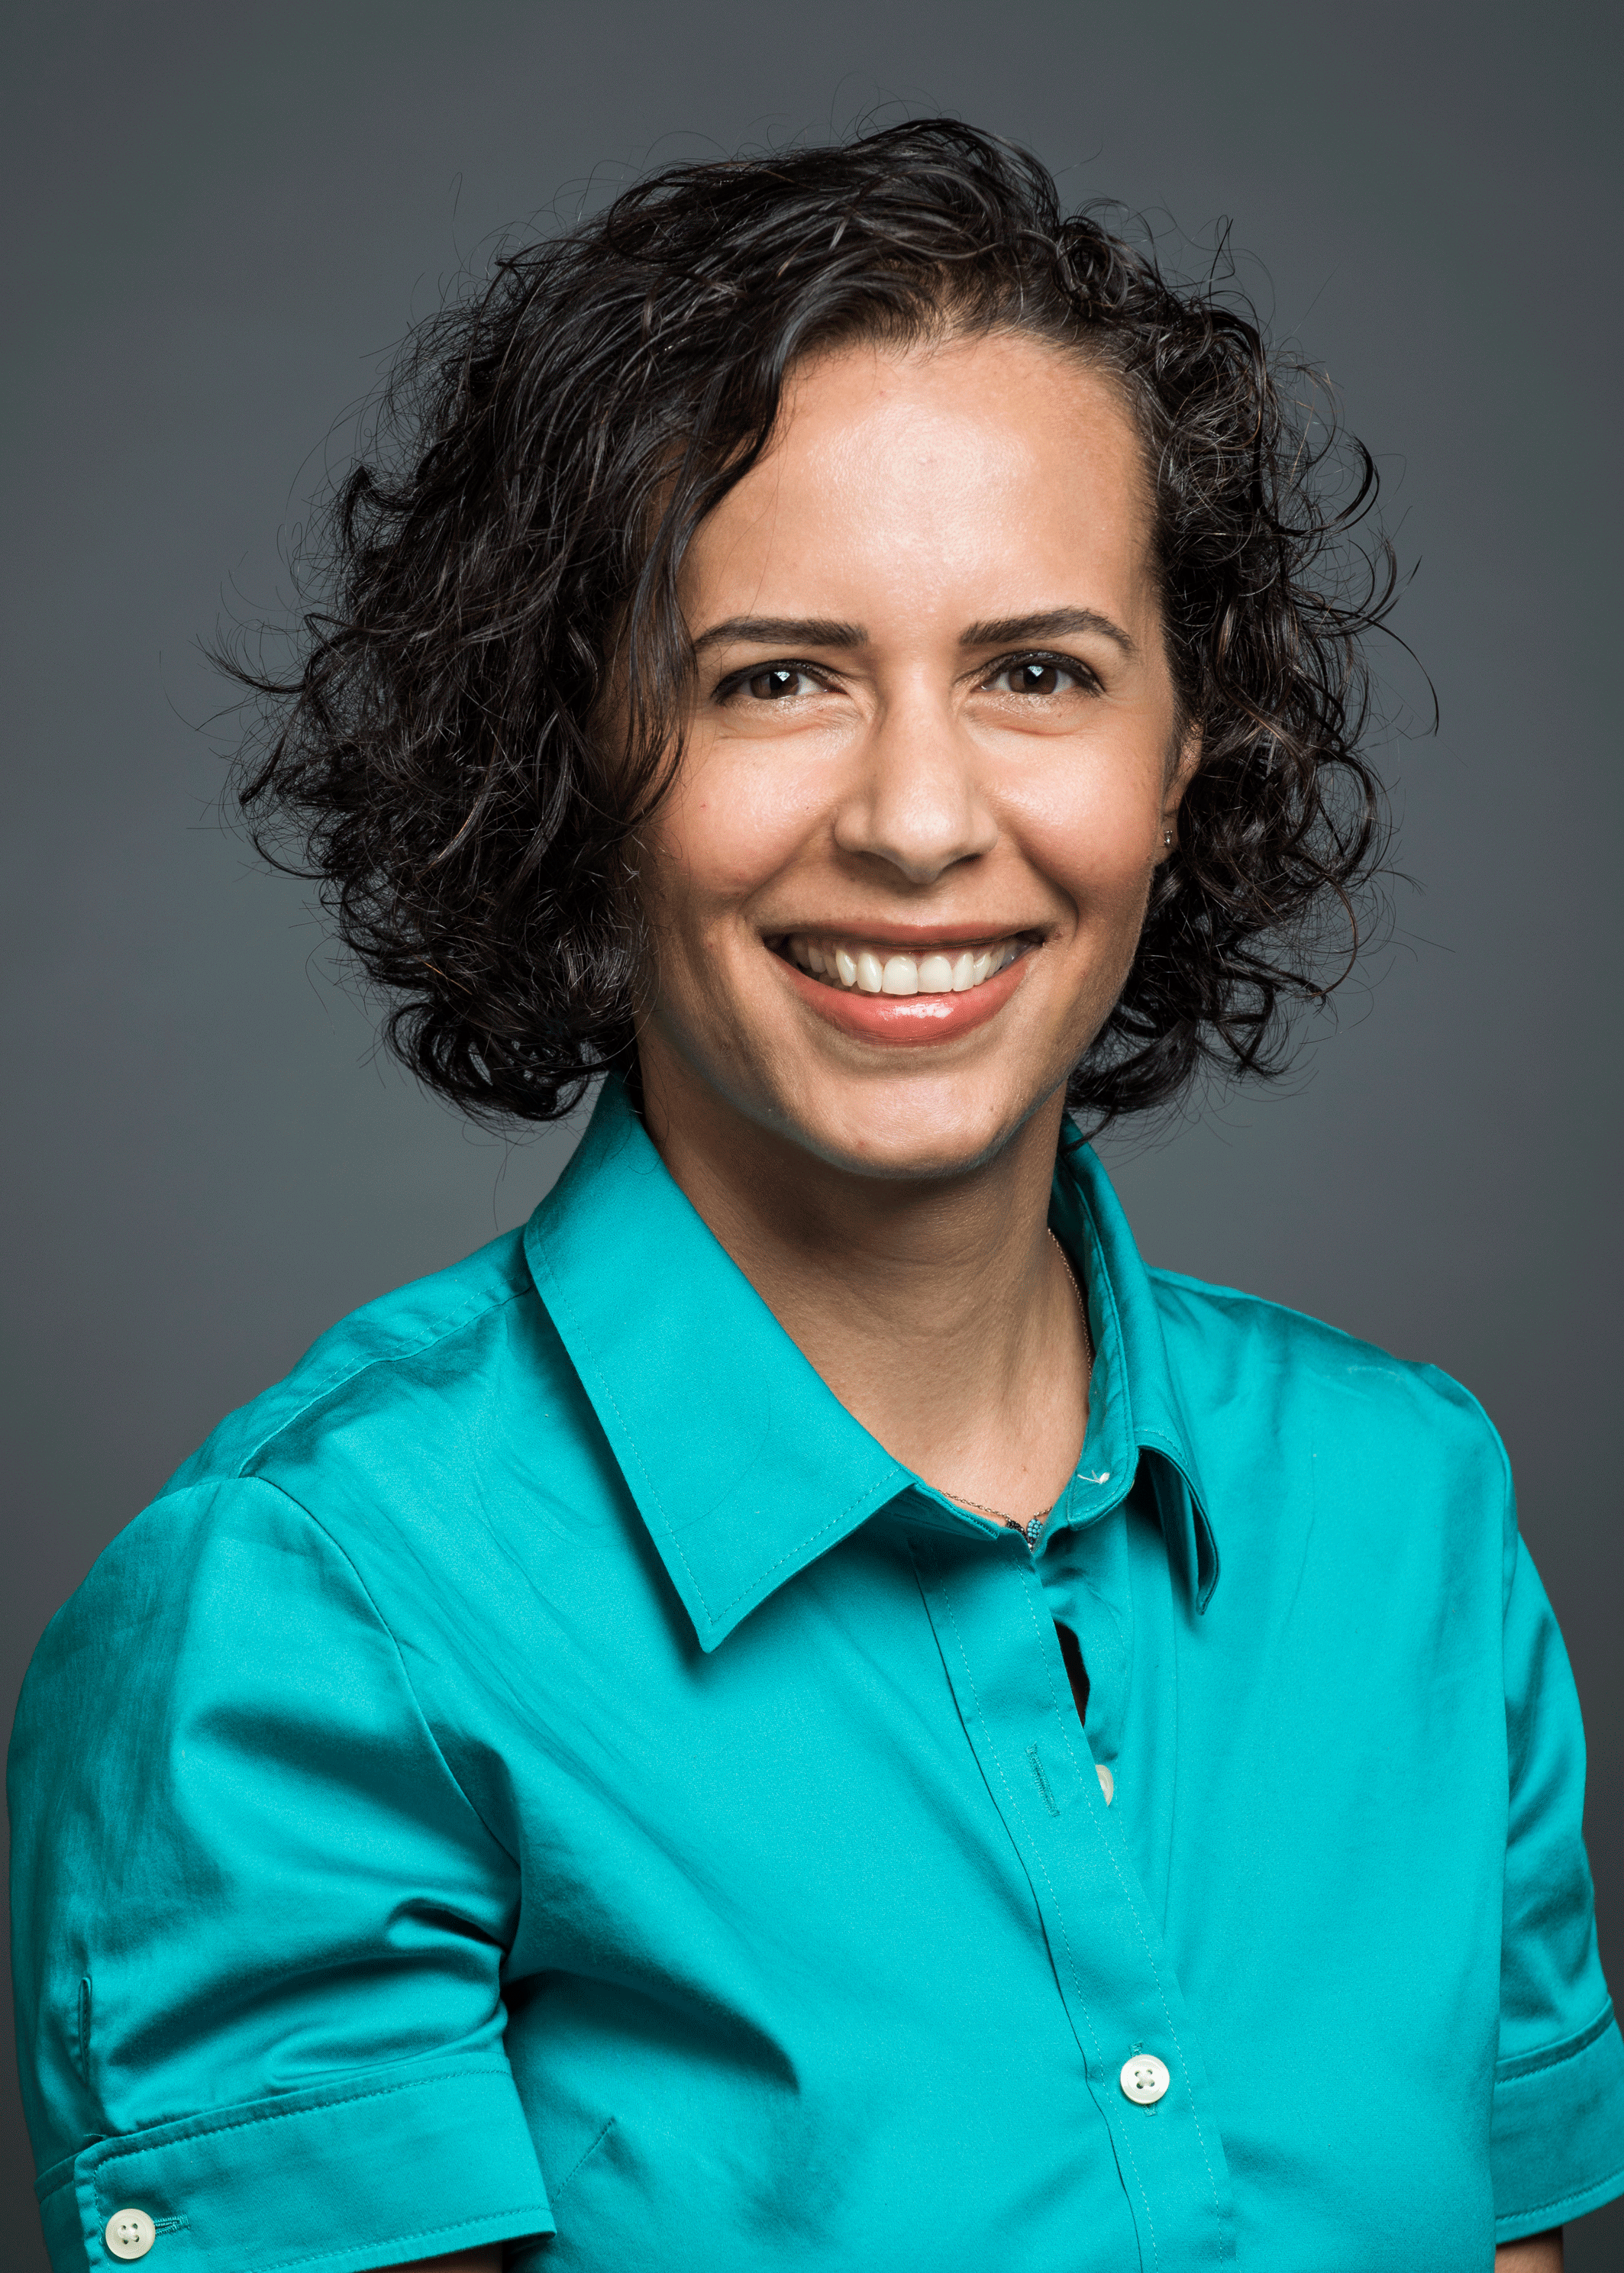 Dr. Özlem Uzuner wears a teal shirt and smiles in her faculty profile for the Department of Information Sciences and Technology.